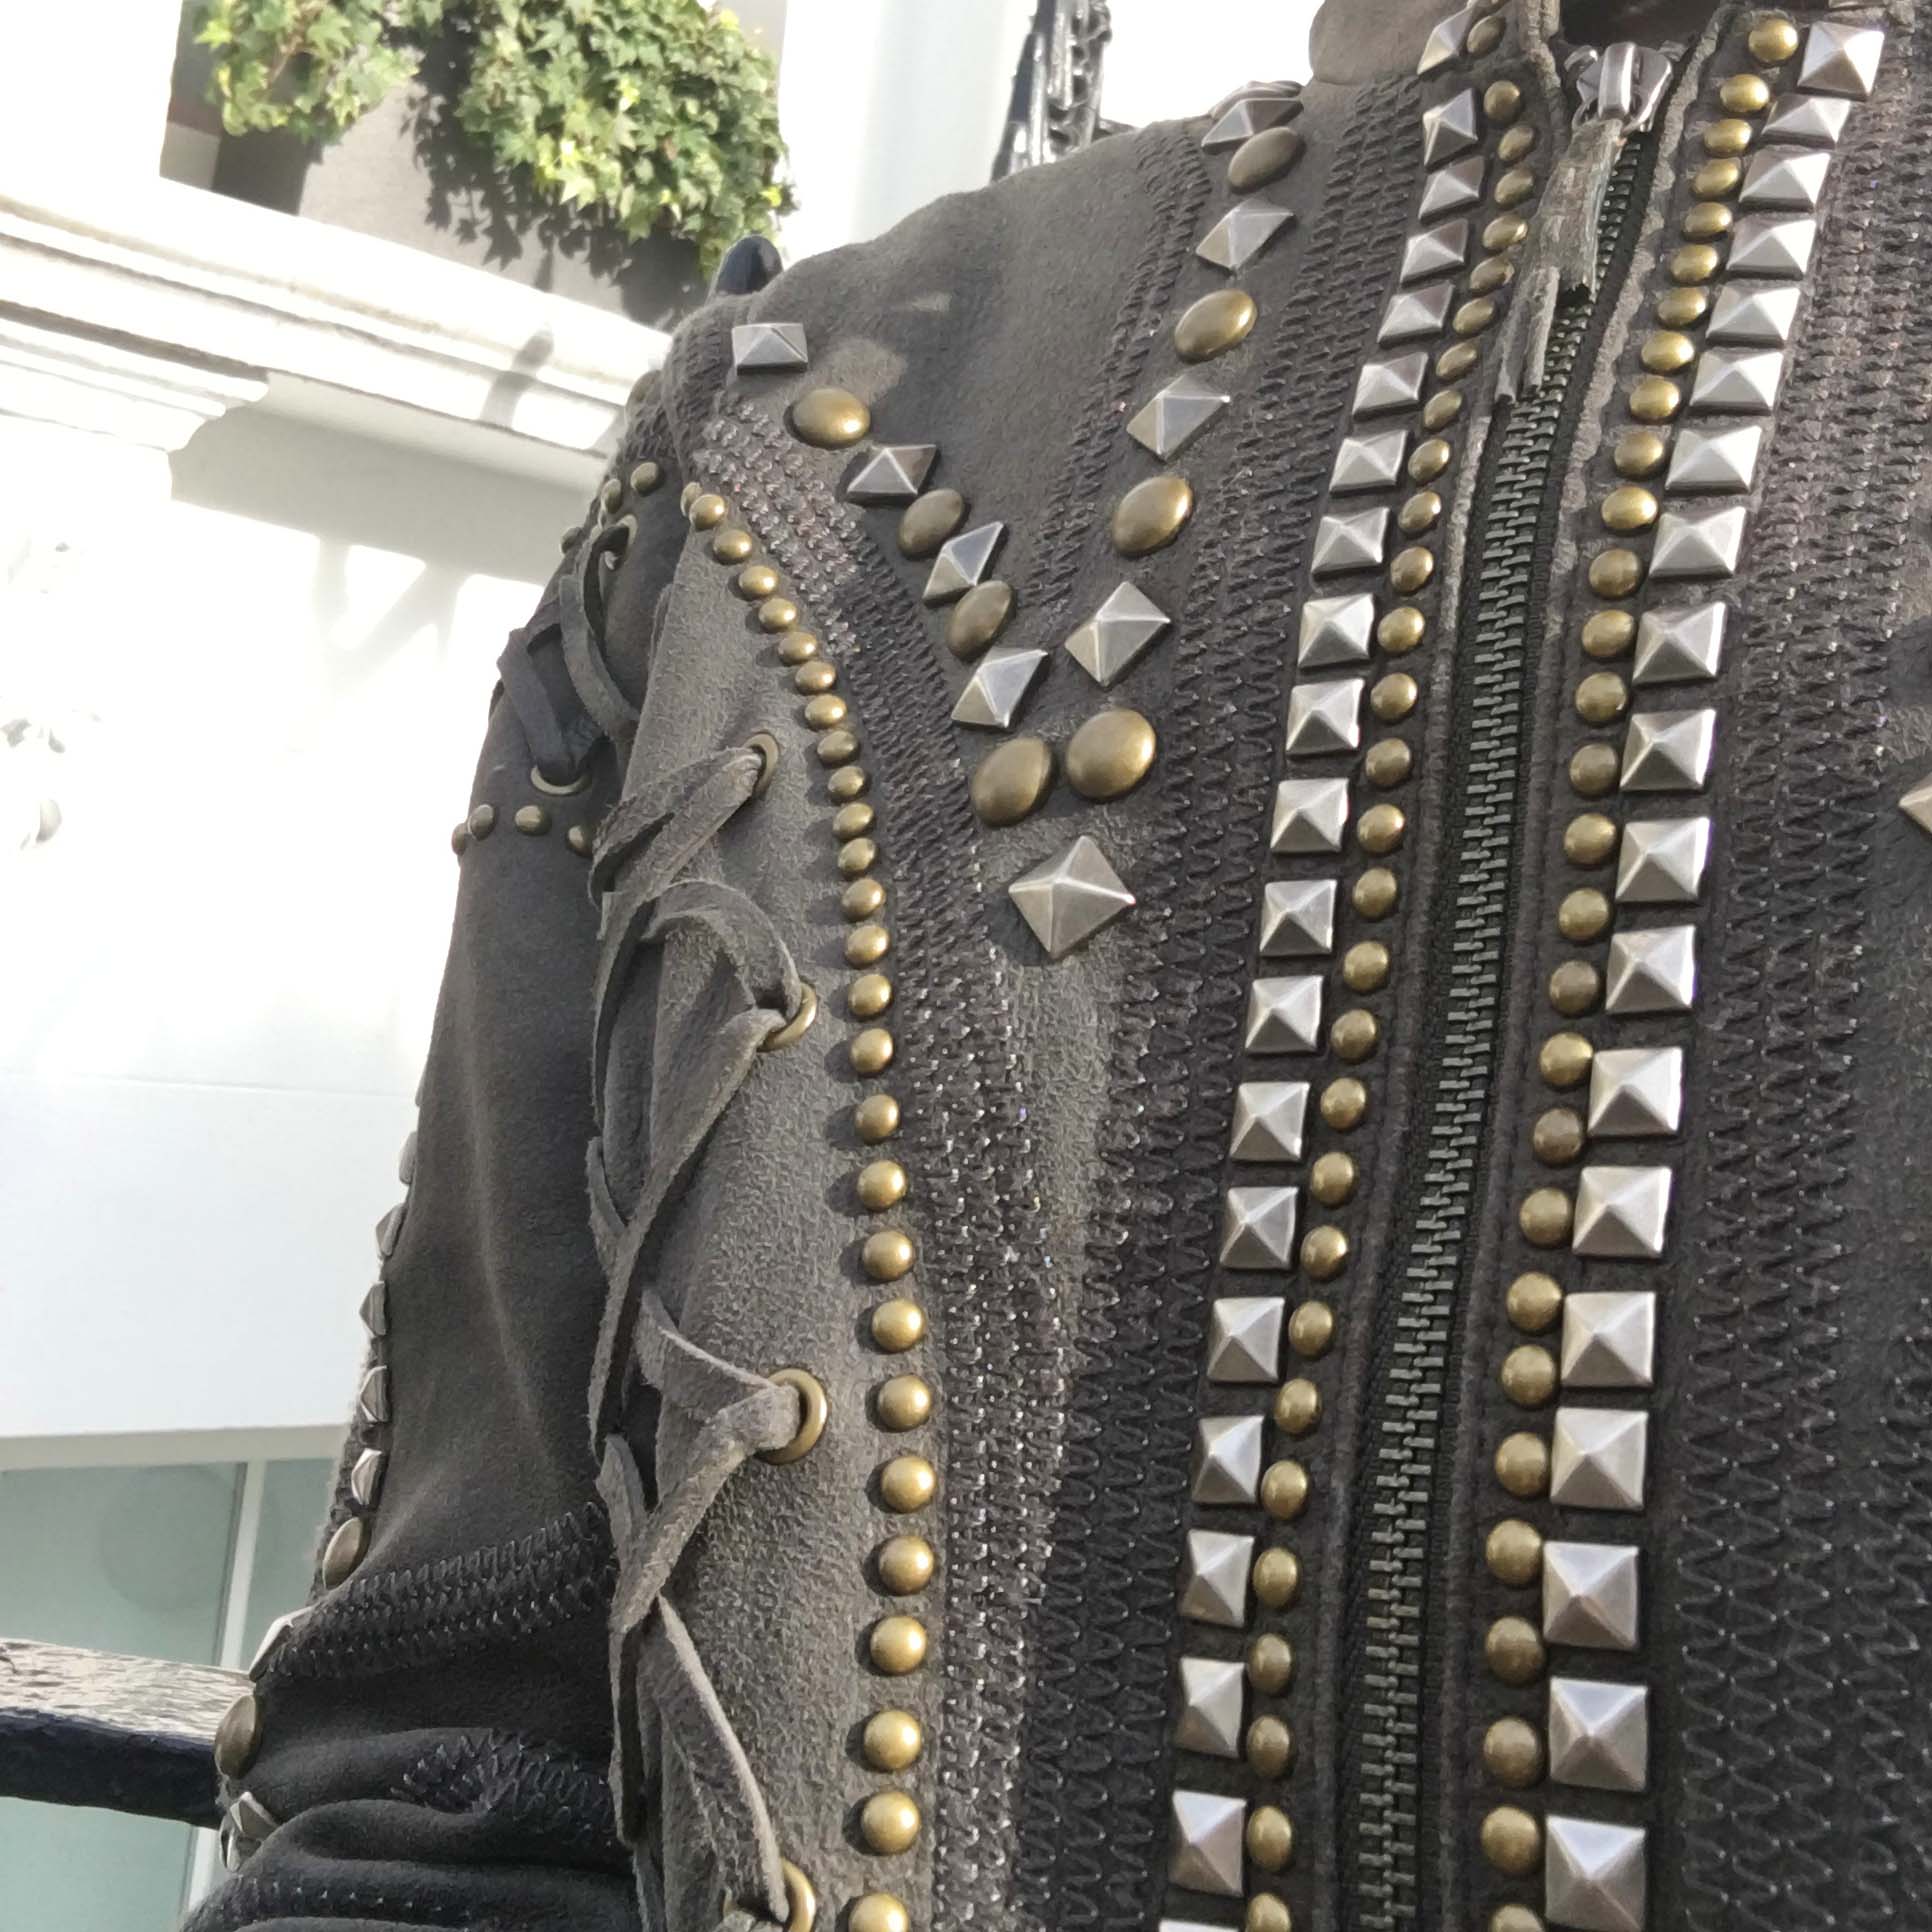 Double D Ranch studded leather jacket